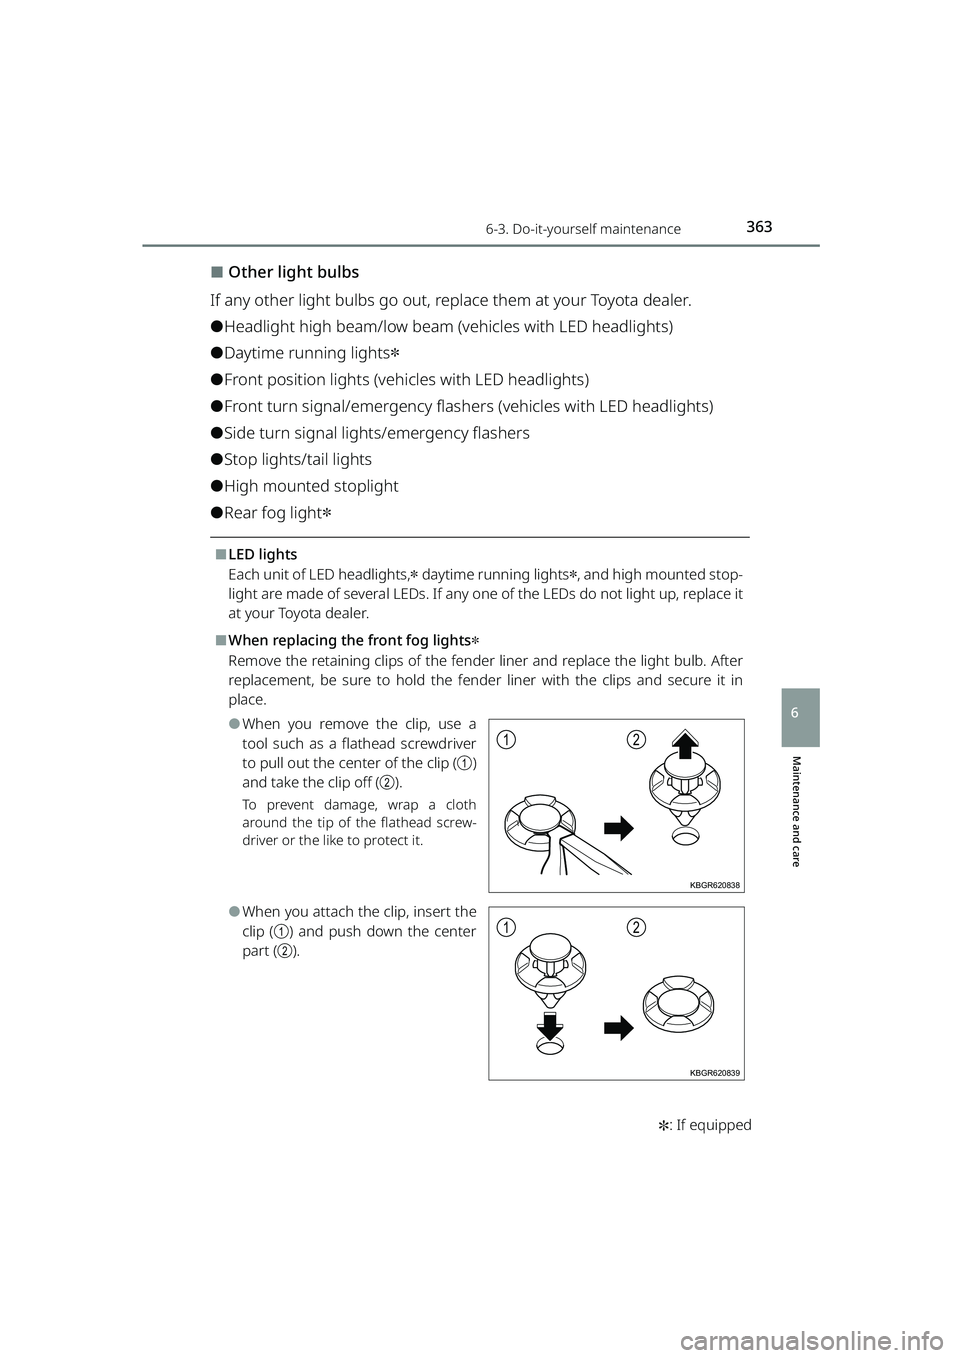 TOYOTA RAIZE 2023  Owners Manual 3636-3. Do-it-yourself maintenance
RAIZE_OM_General_BZ358E✽
: If equipped
Maintenance and care
6
⬛Other light bulbs
If any other light bulbs go out, replace them at your Toyota dealer.
⚫Headligh